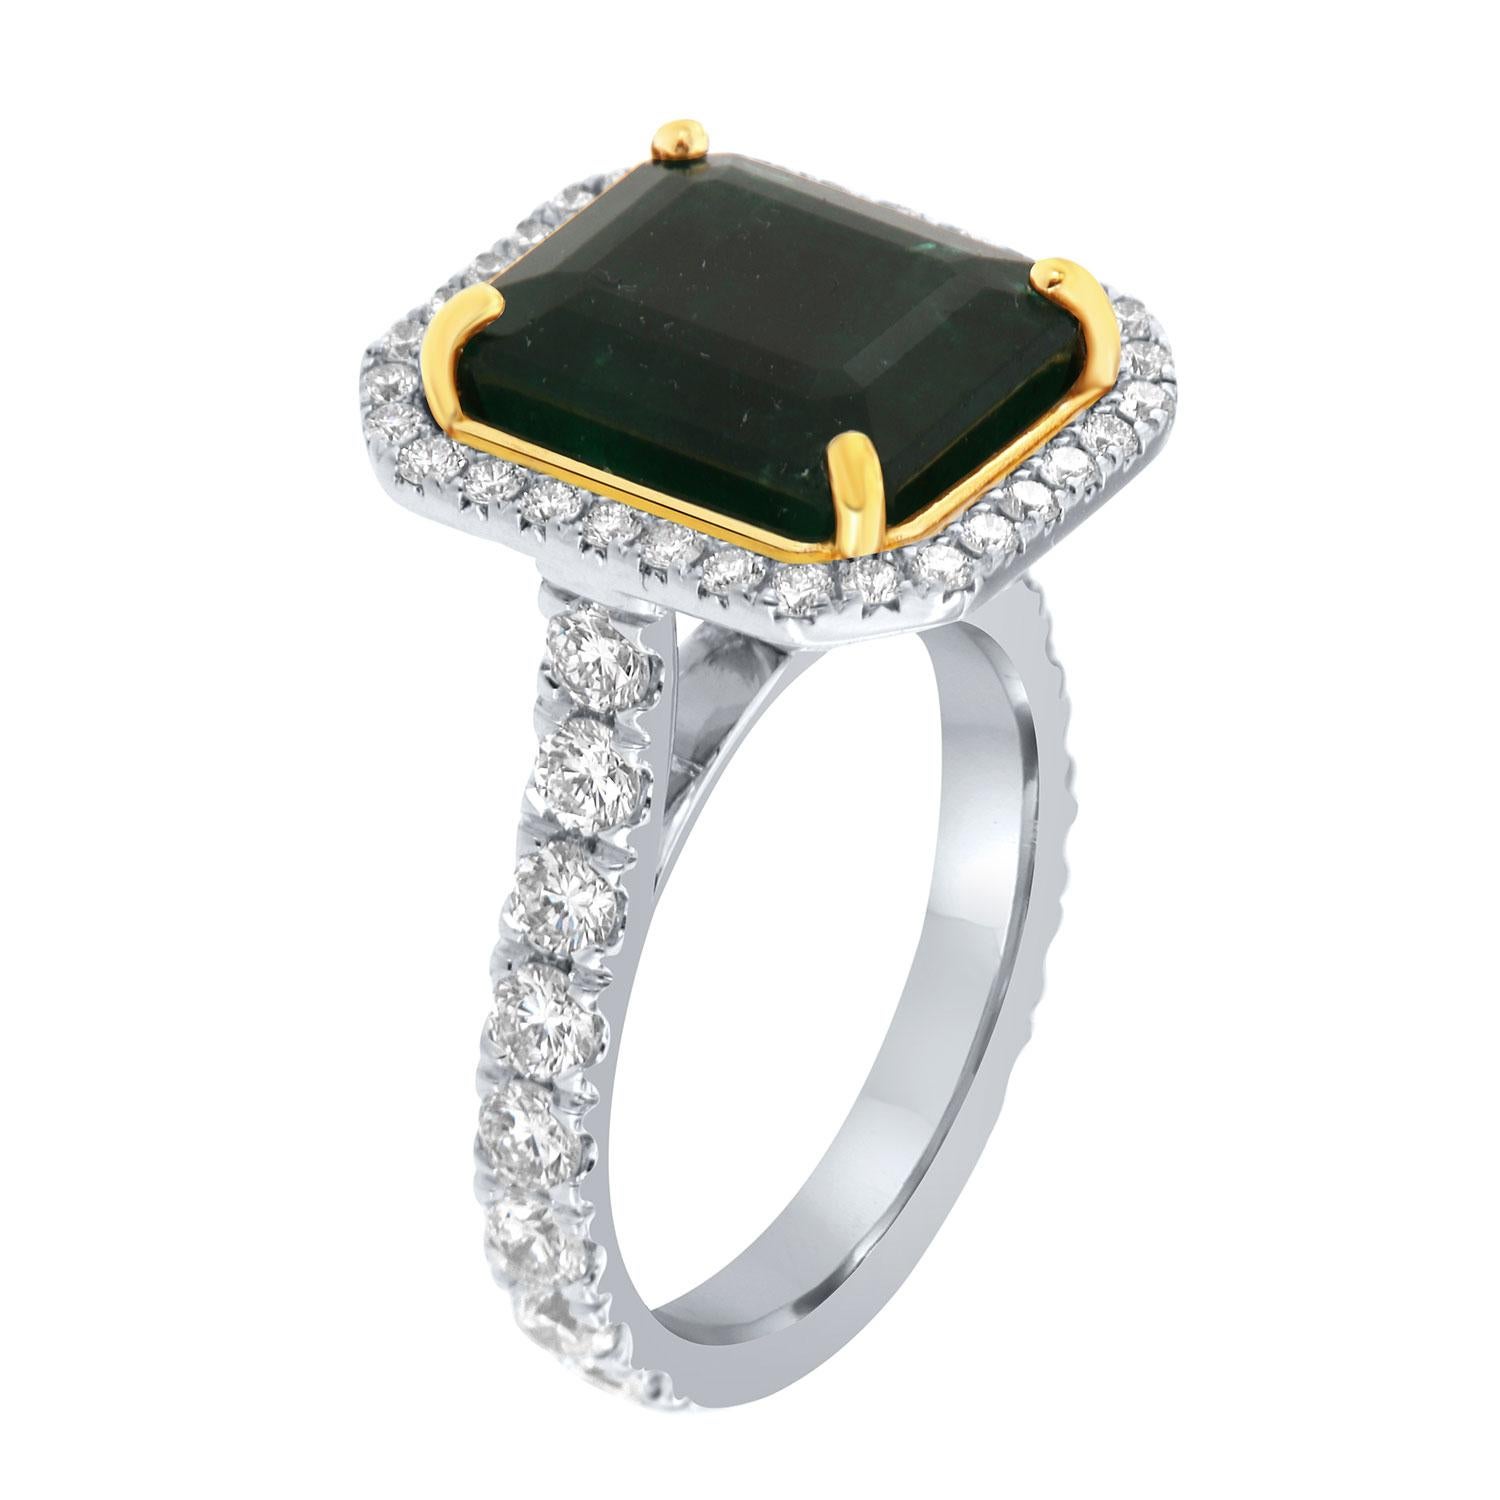 This 18k white and yellow gold ring features a 7.51 Carat Emerald cut Natural Green emerald from Zambia. It is encircled by a halo of brilliant round diamonds on a 3.3 mm wide band. The diamonds are Micro-Prong set on 75% of the band.  The diamond's